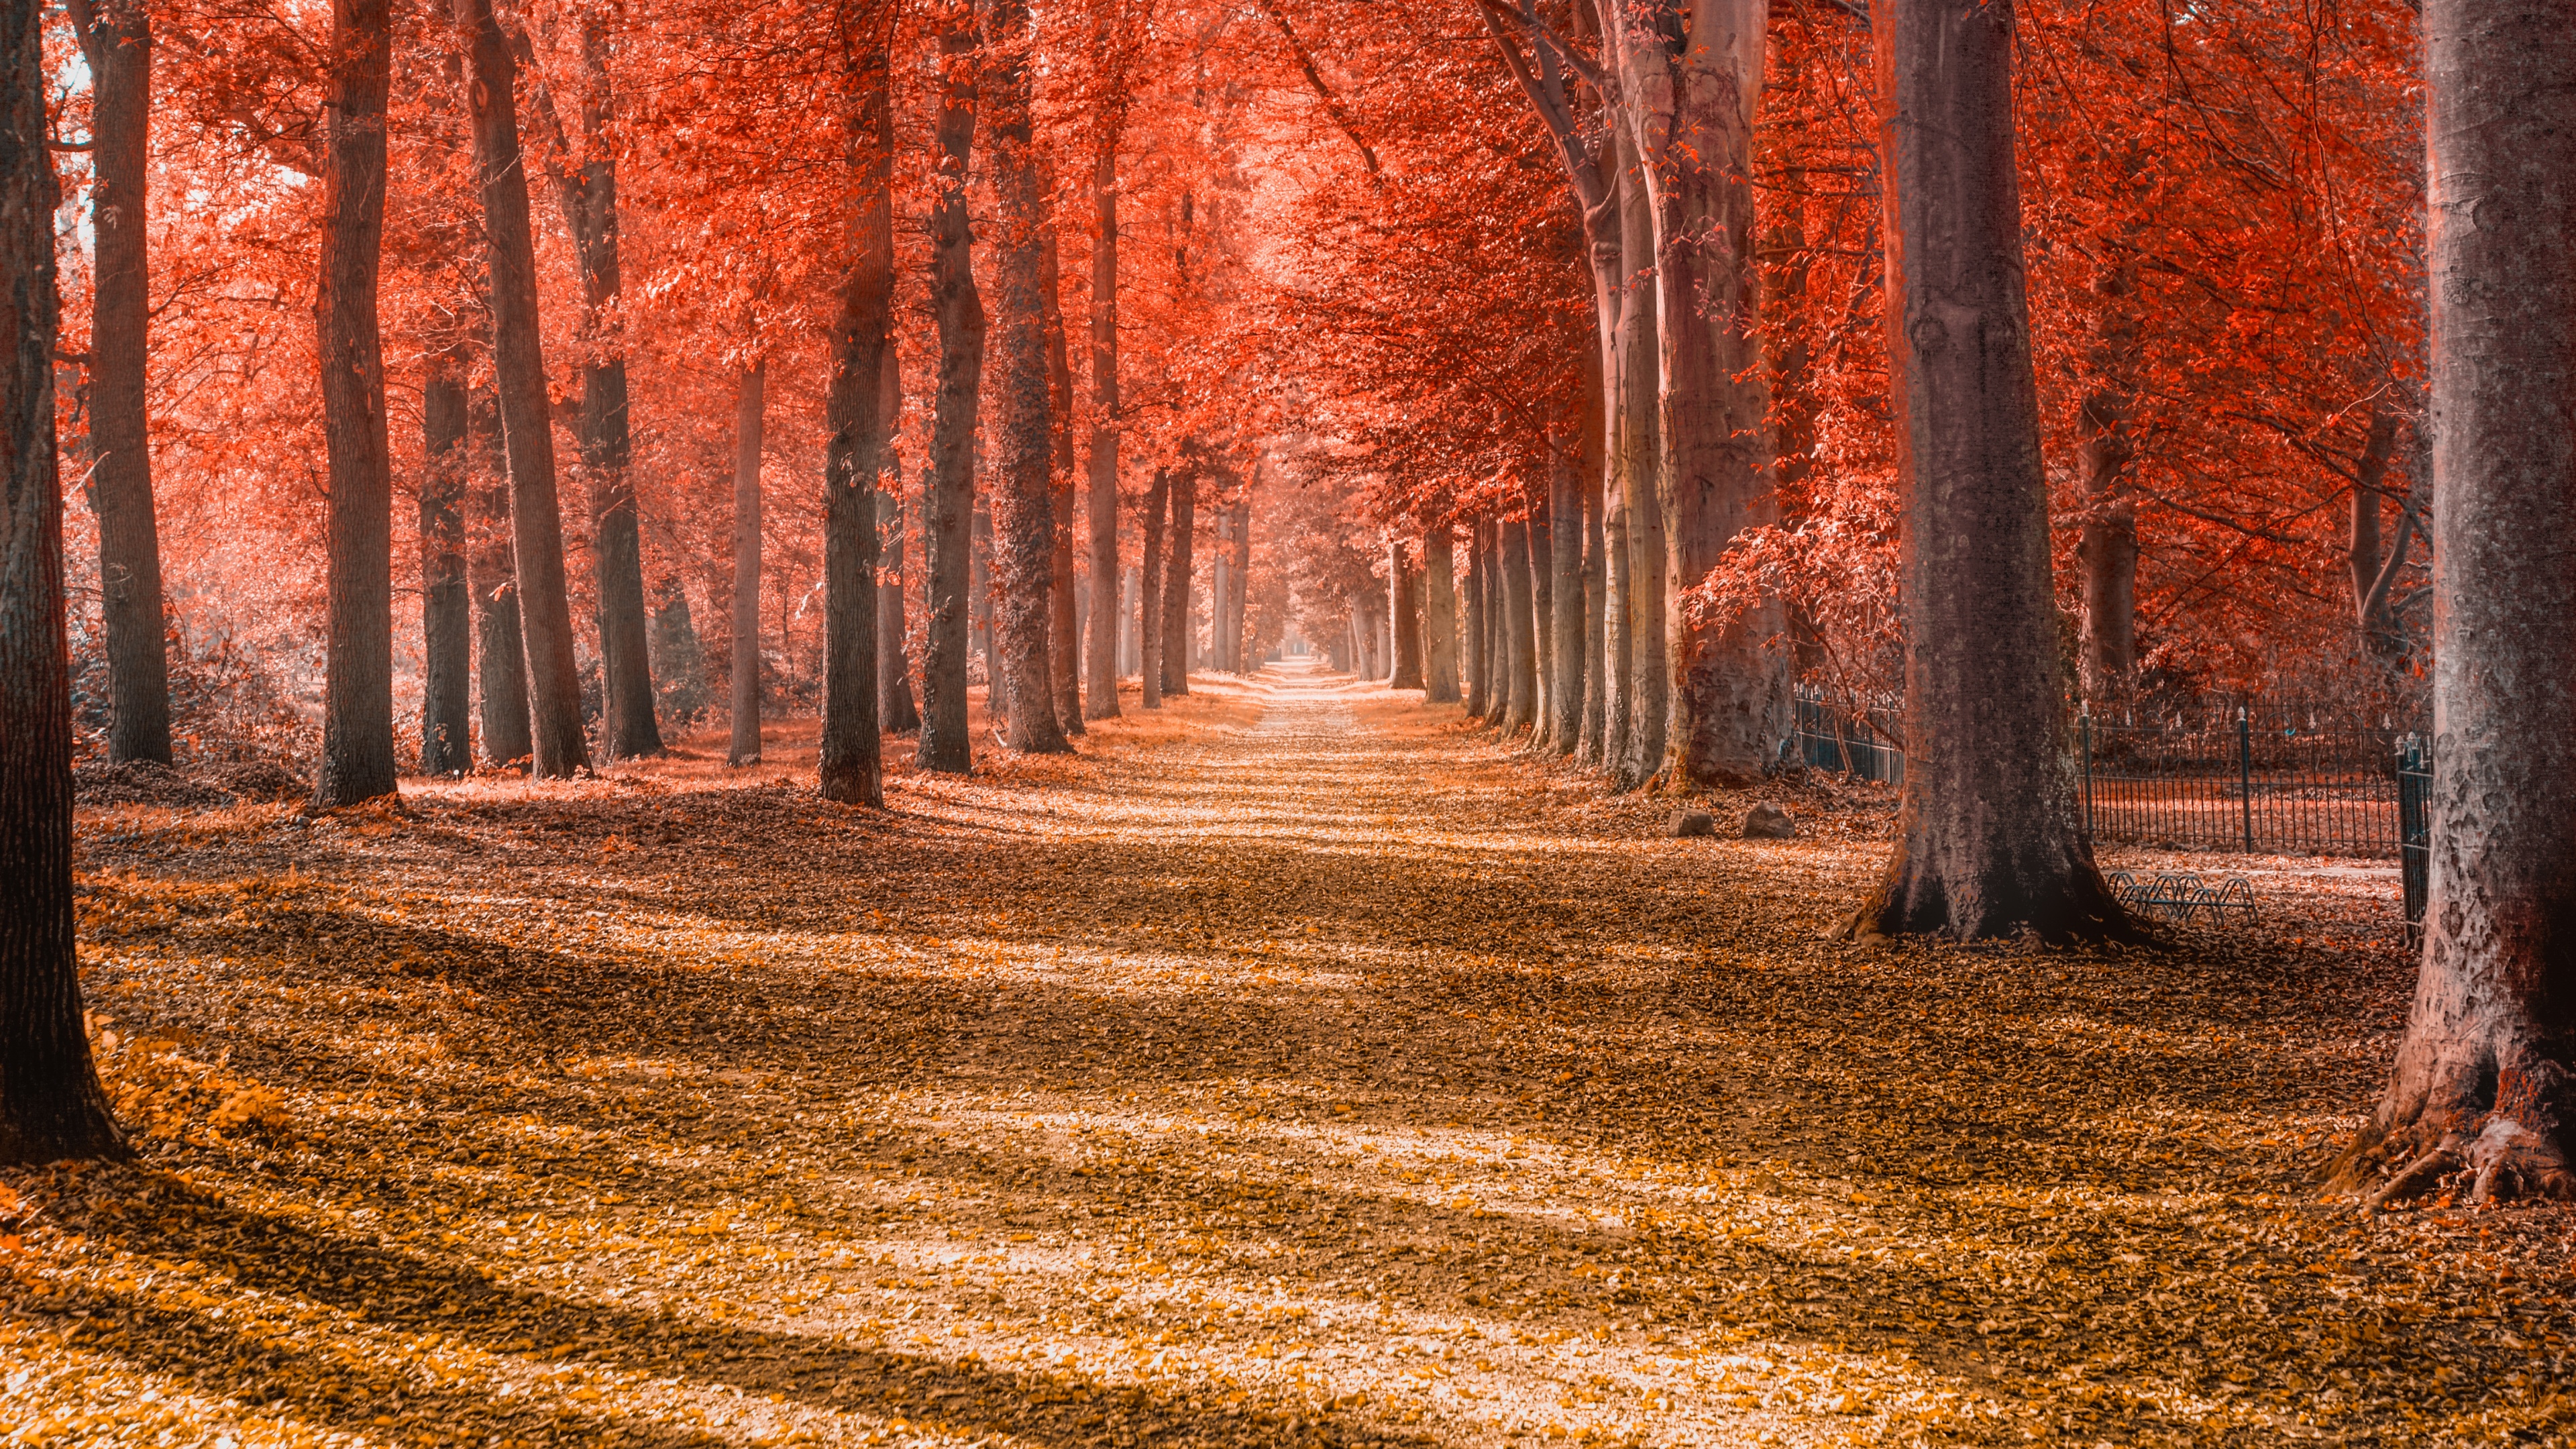 Autumn trees Wallpaper 4K, Forest path, Trunks, Woods, Autumn leaves, Red, Nature